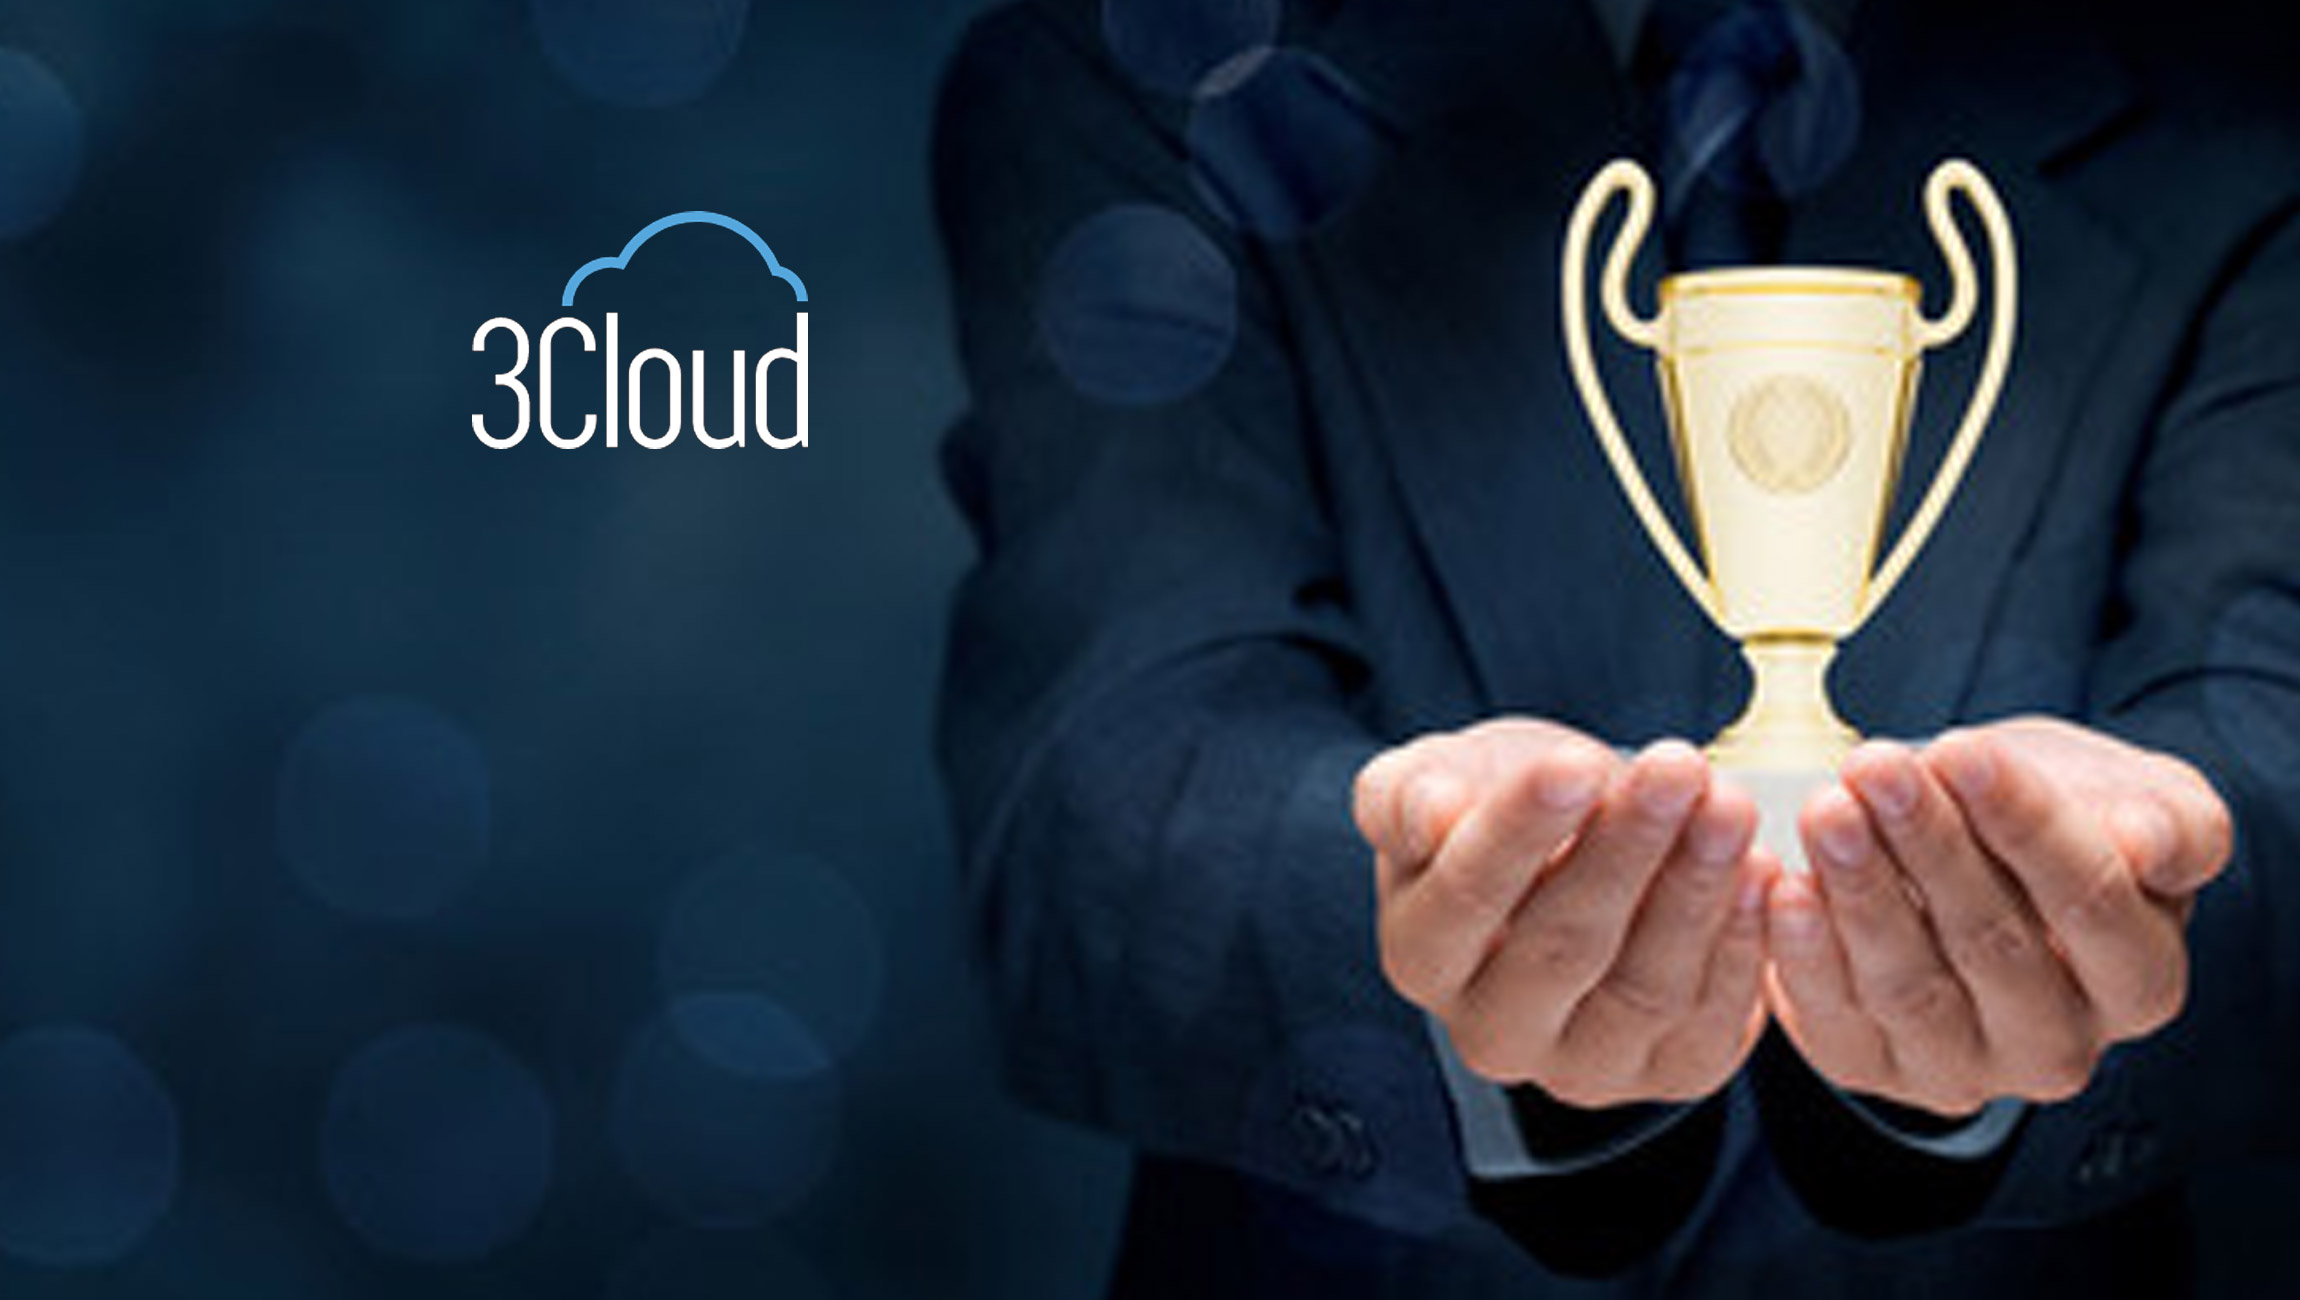 Microsoft Recognizes 3Cloud as Top Azure Partner Worldwide With Multiple Partner of the Year Awards